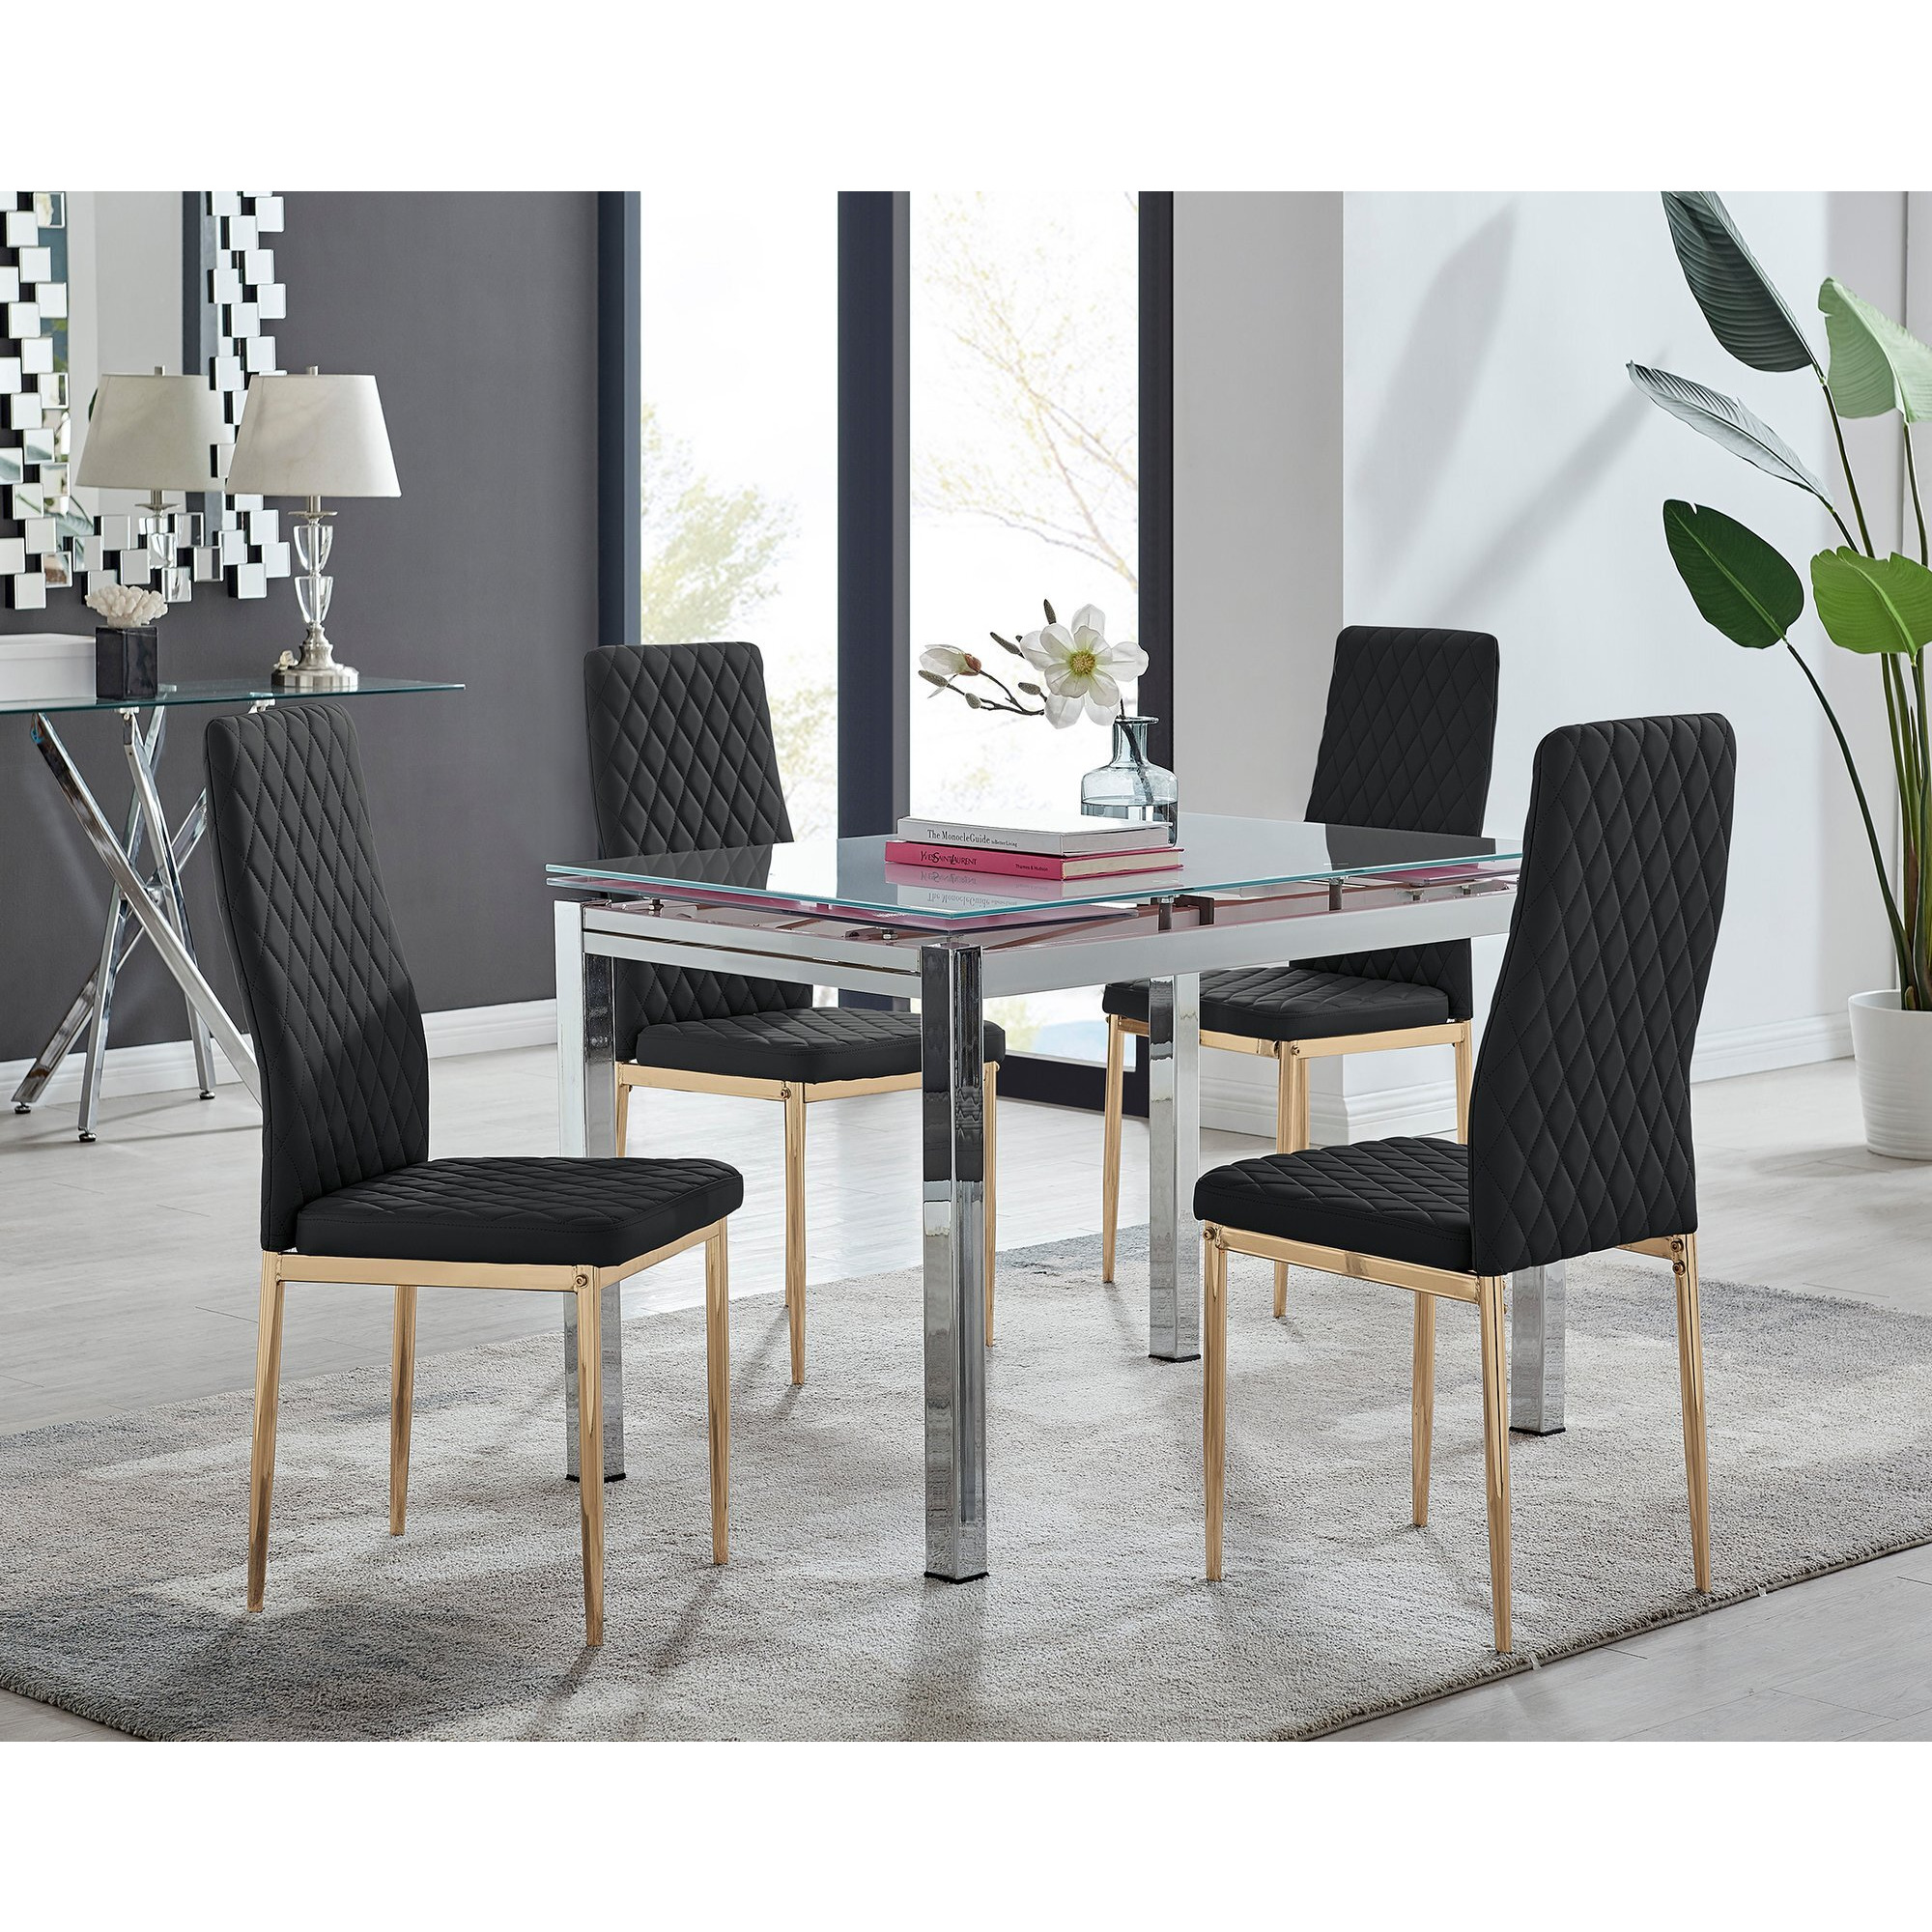 Enna White Glass Extending Dining Table and 4 Gold Leg Milan Chairs